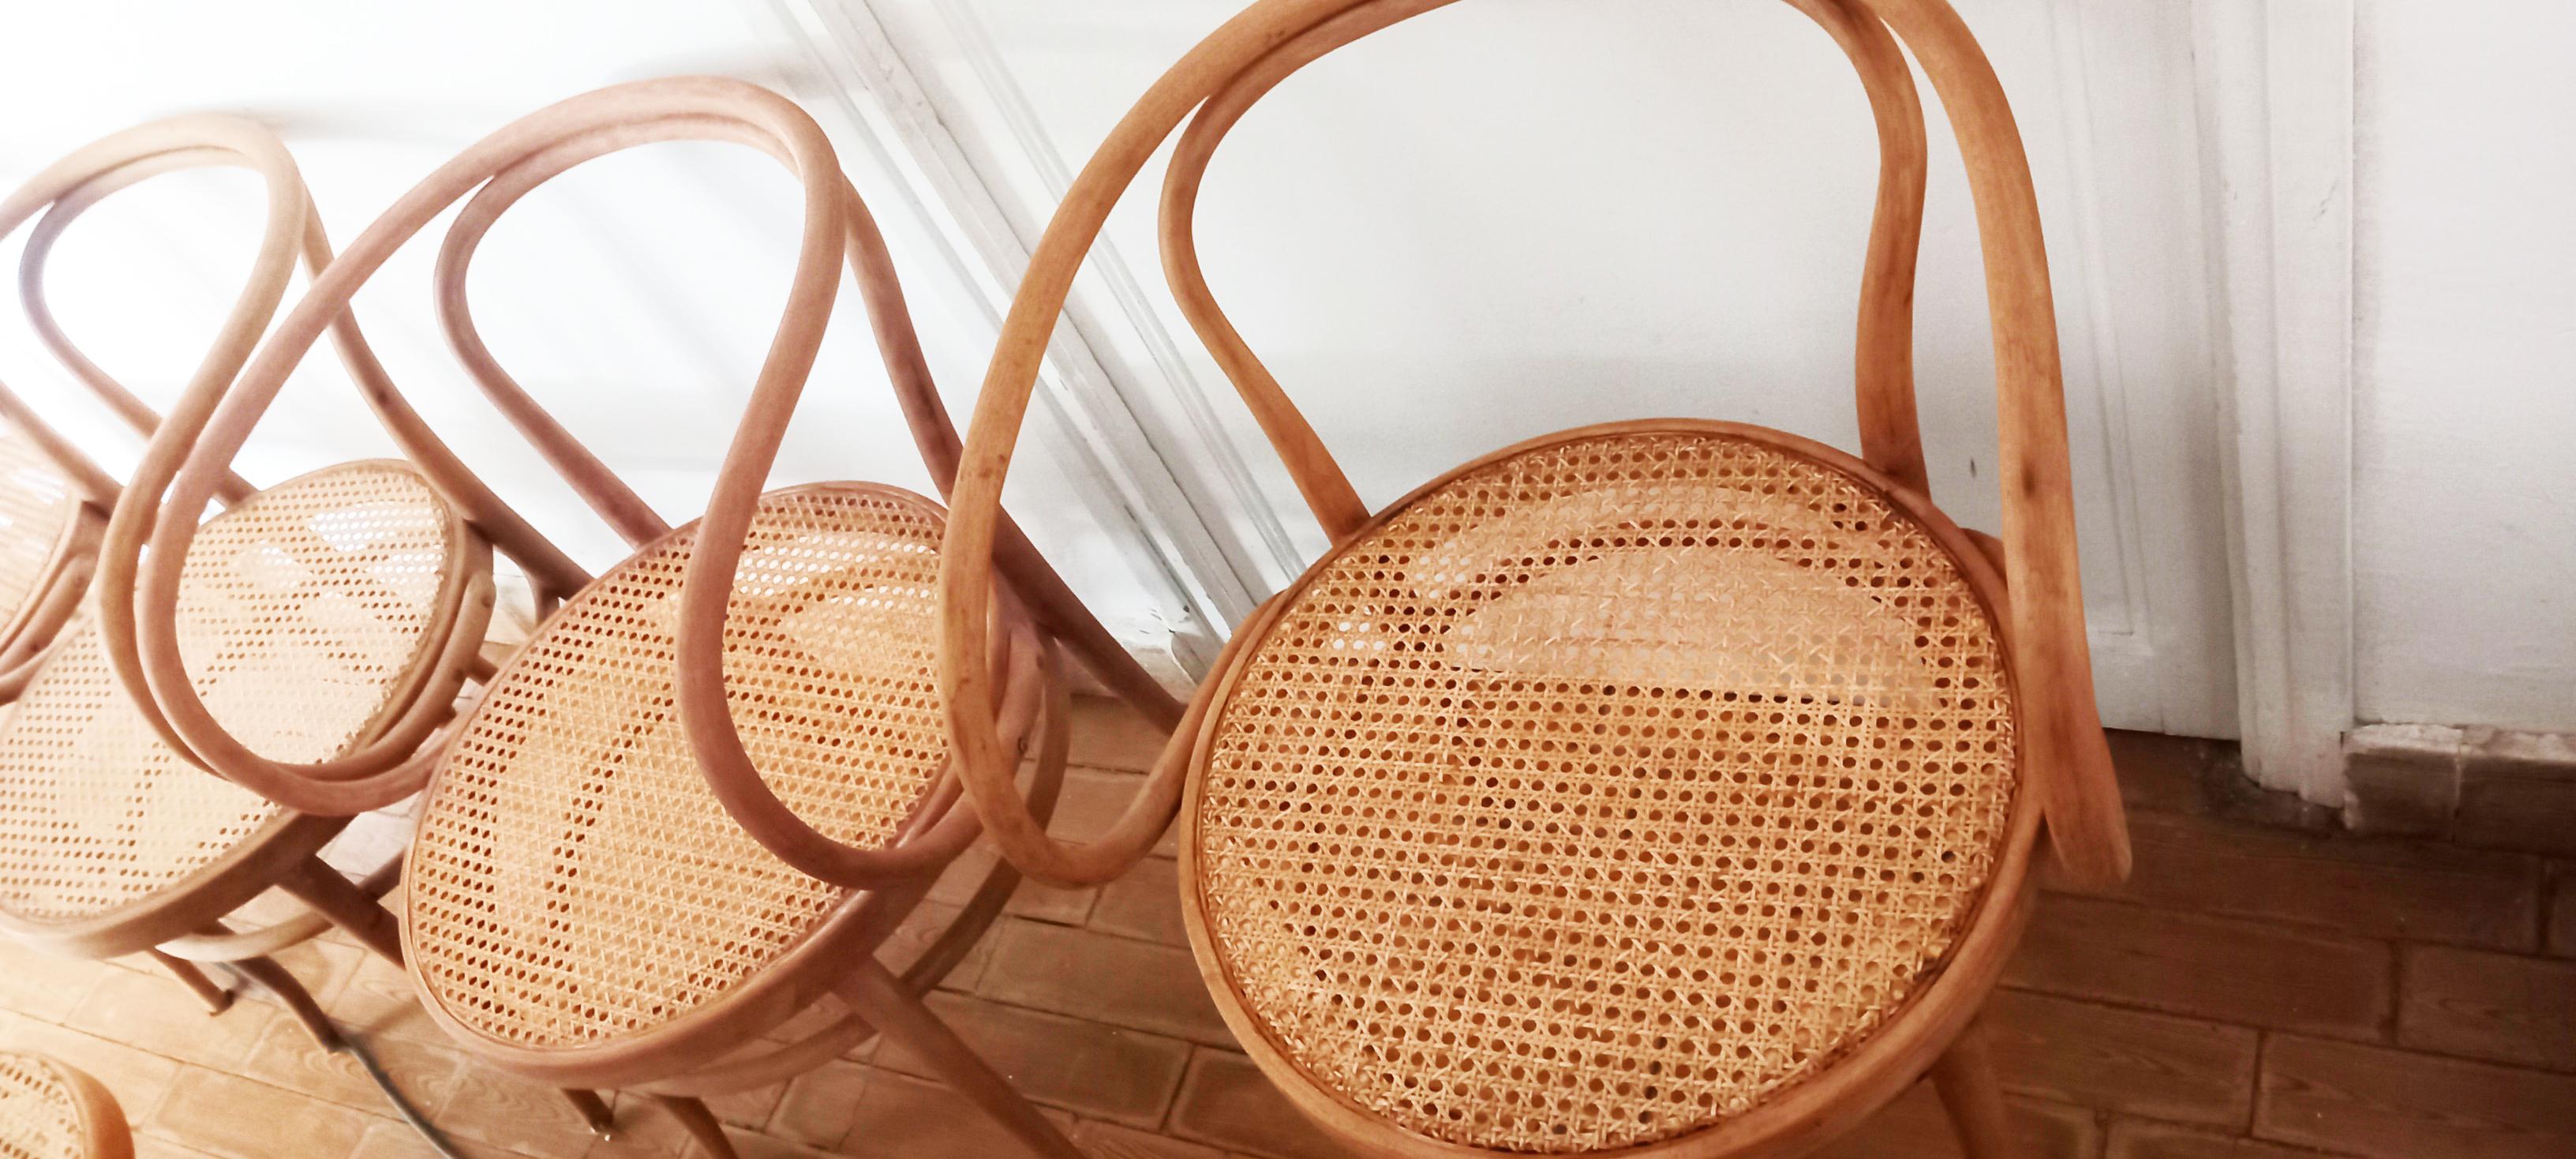 Czech Thonet 209 Cane Bentwood Chairs After Thonet 209, 1950s For Sale